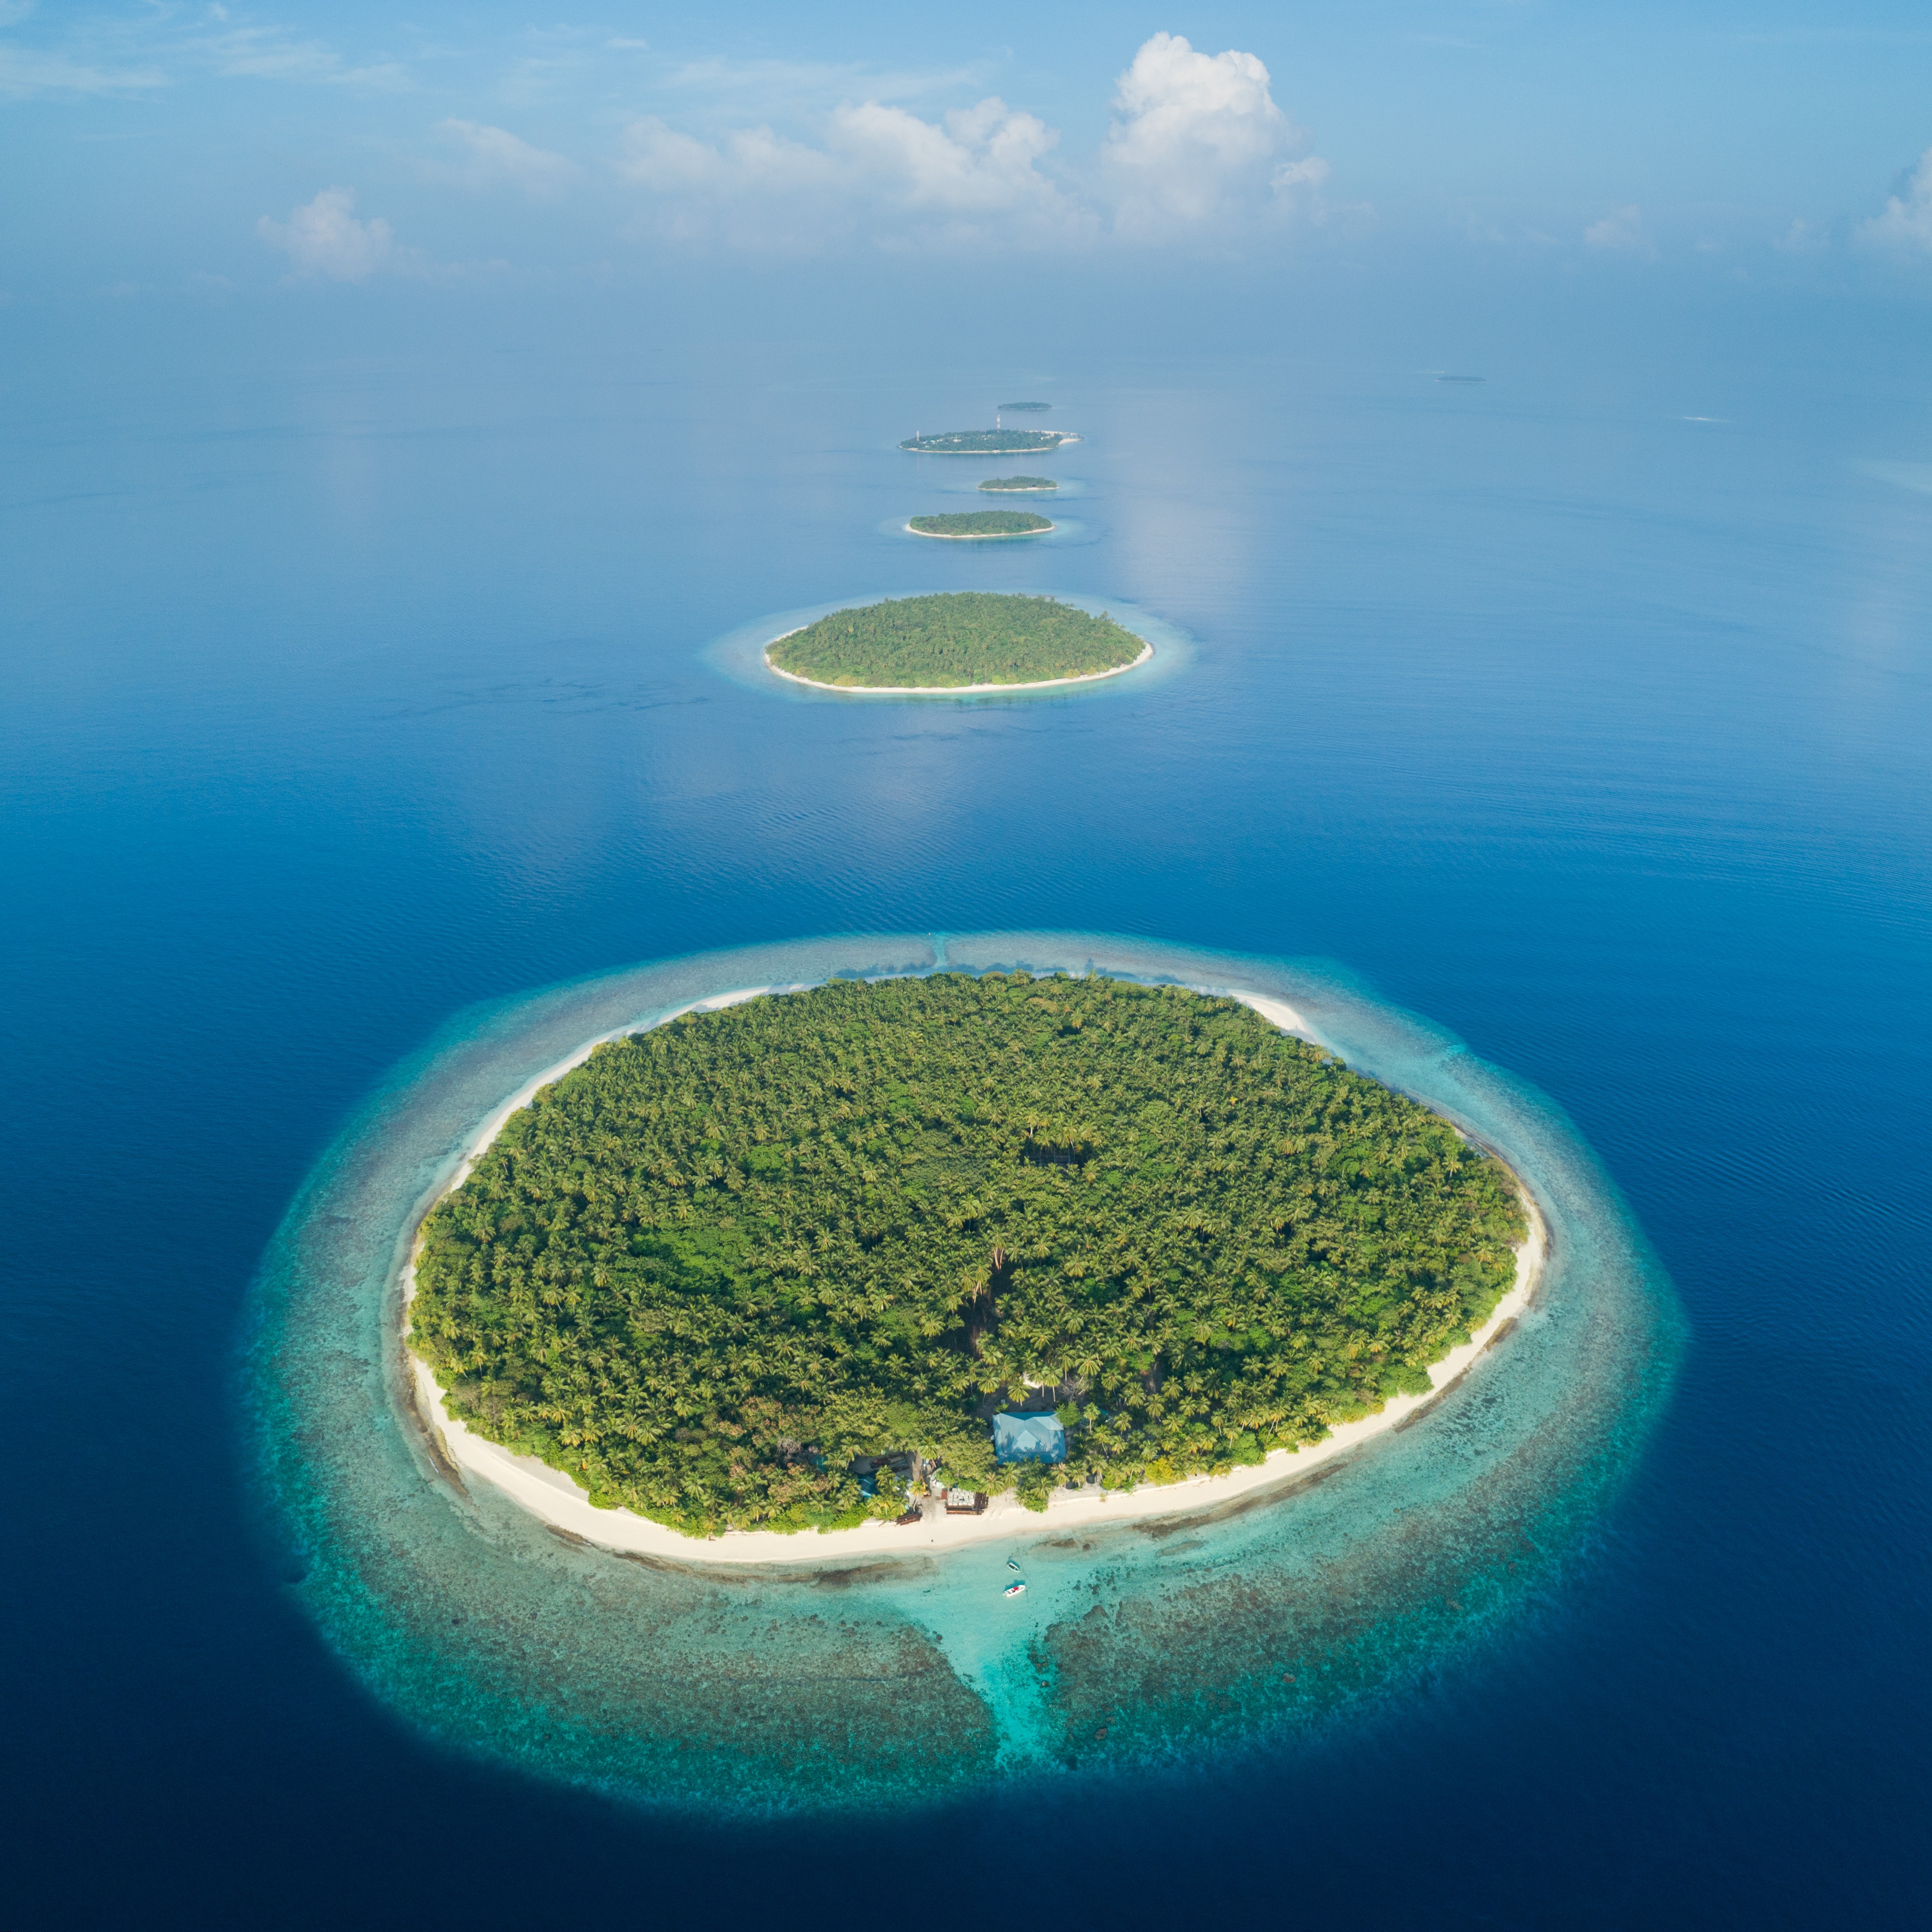 nature, view from above, ocean, tropics, maldives, islands